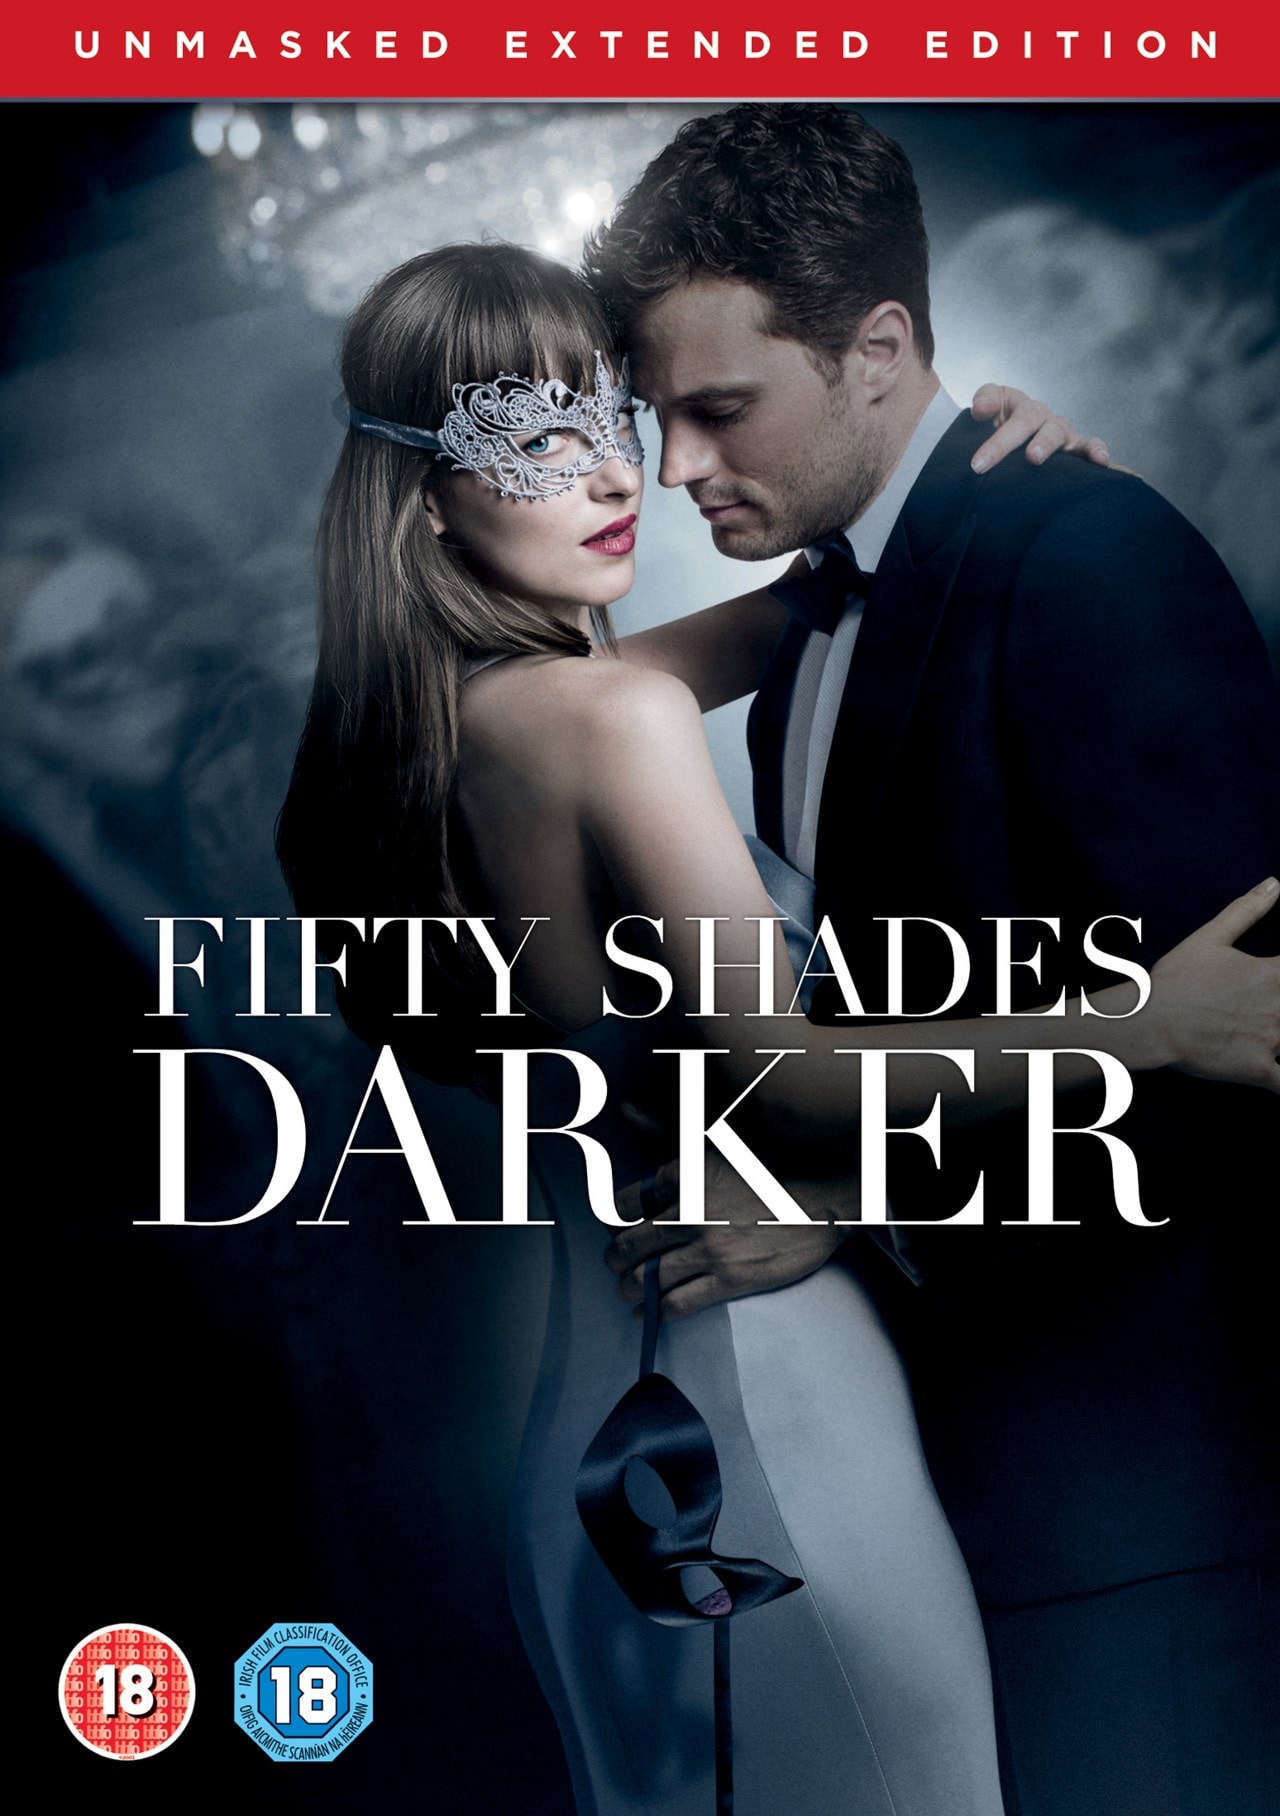 Fifty Shades Darker The Unmasked Extended Edition Dvd Free Shipping Over £20 Hmv Store